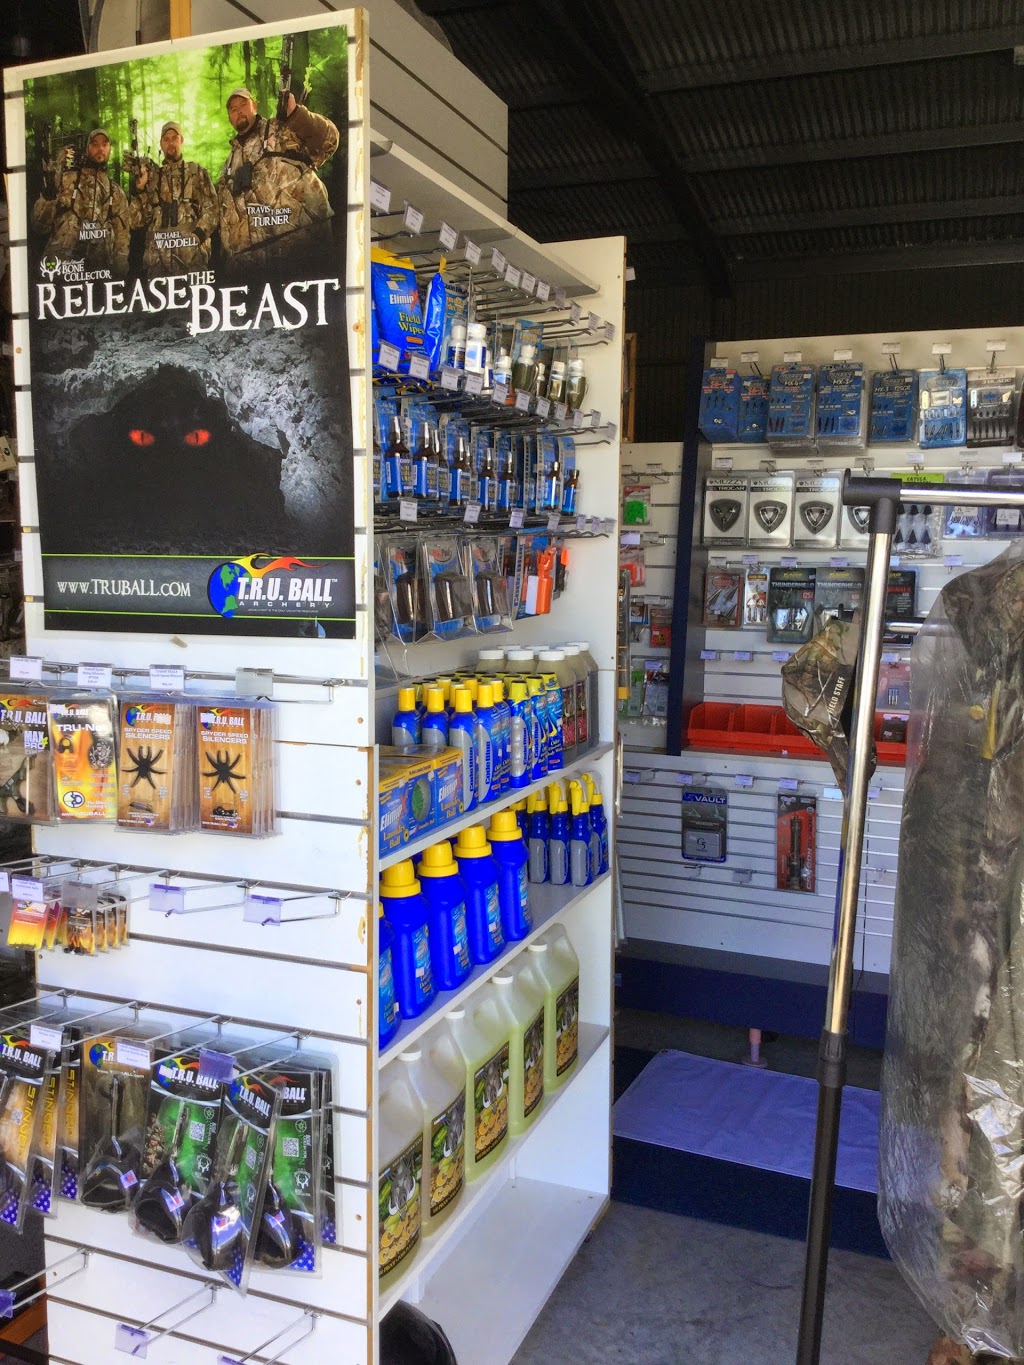 Mystic Marine Archery and Outdoors | store | 84 Riverside Dr, Narrabri NSW 2390, Australia | 0427921036 OR +61 427 921 036